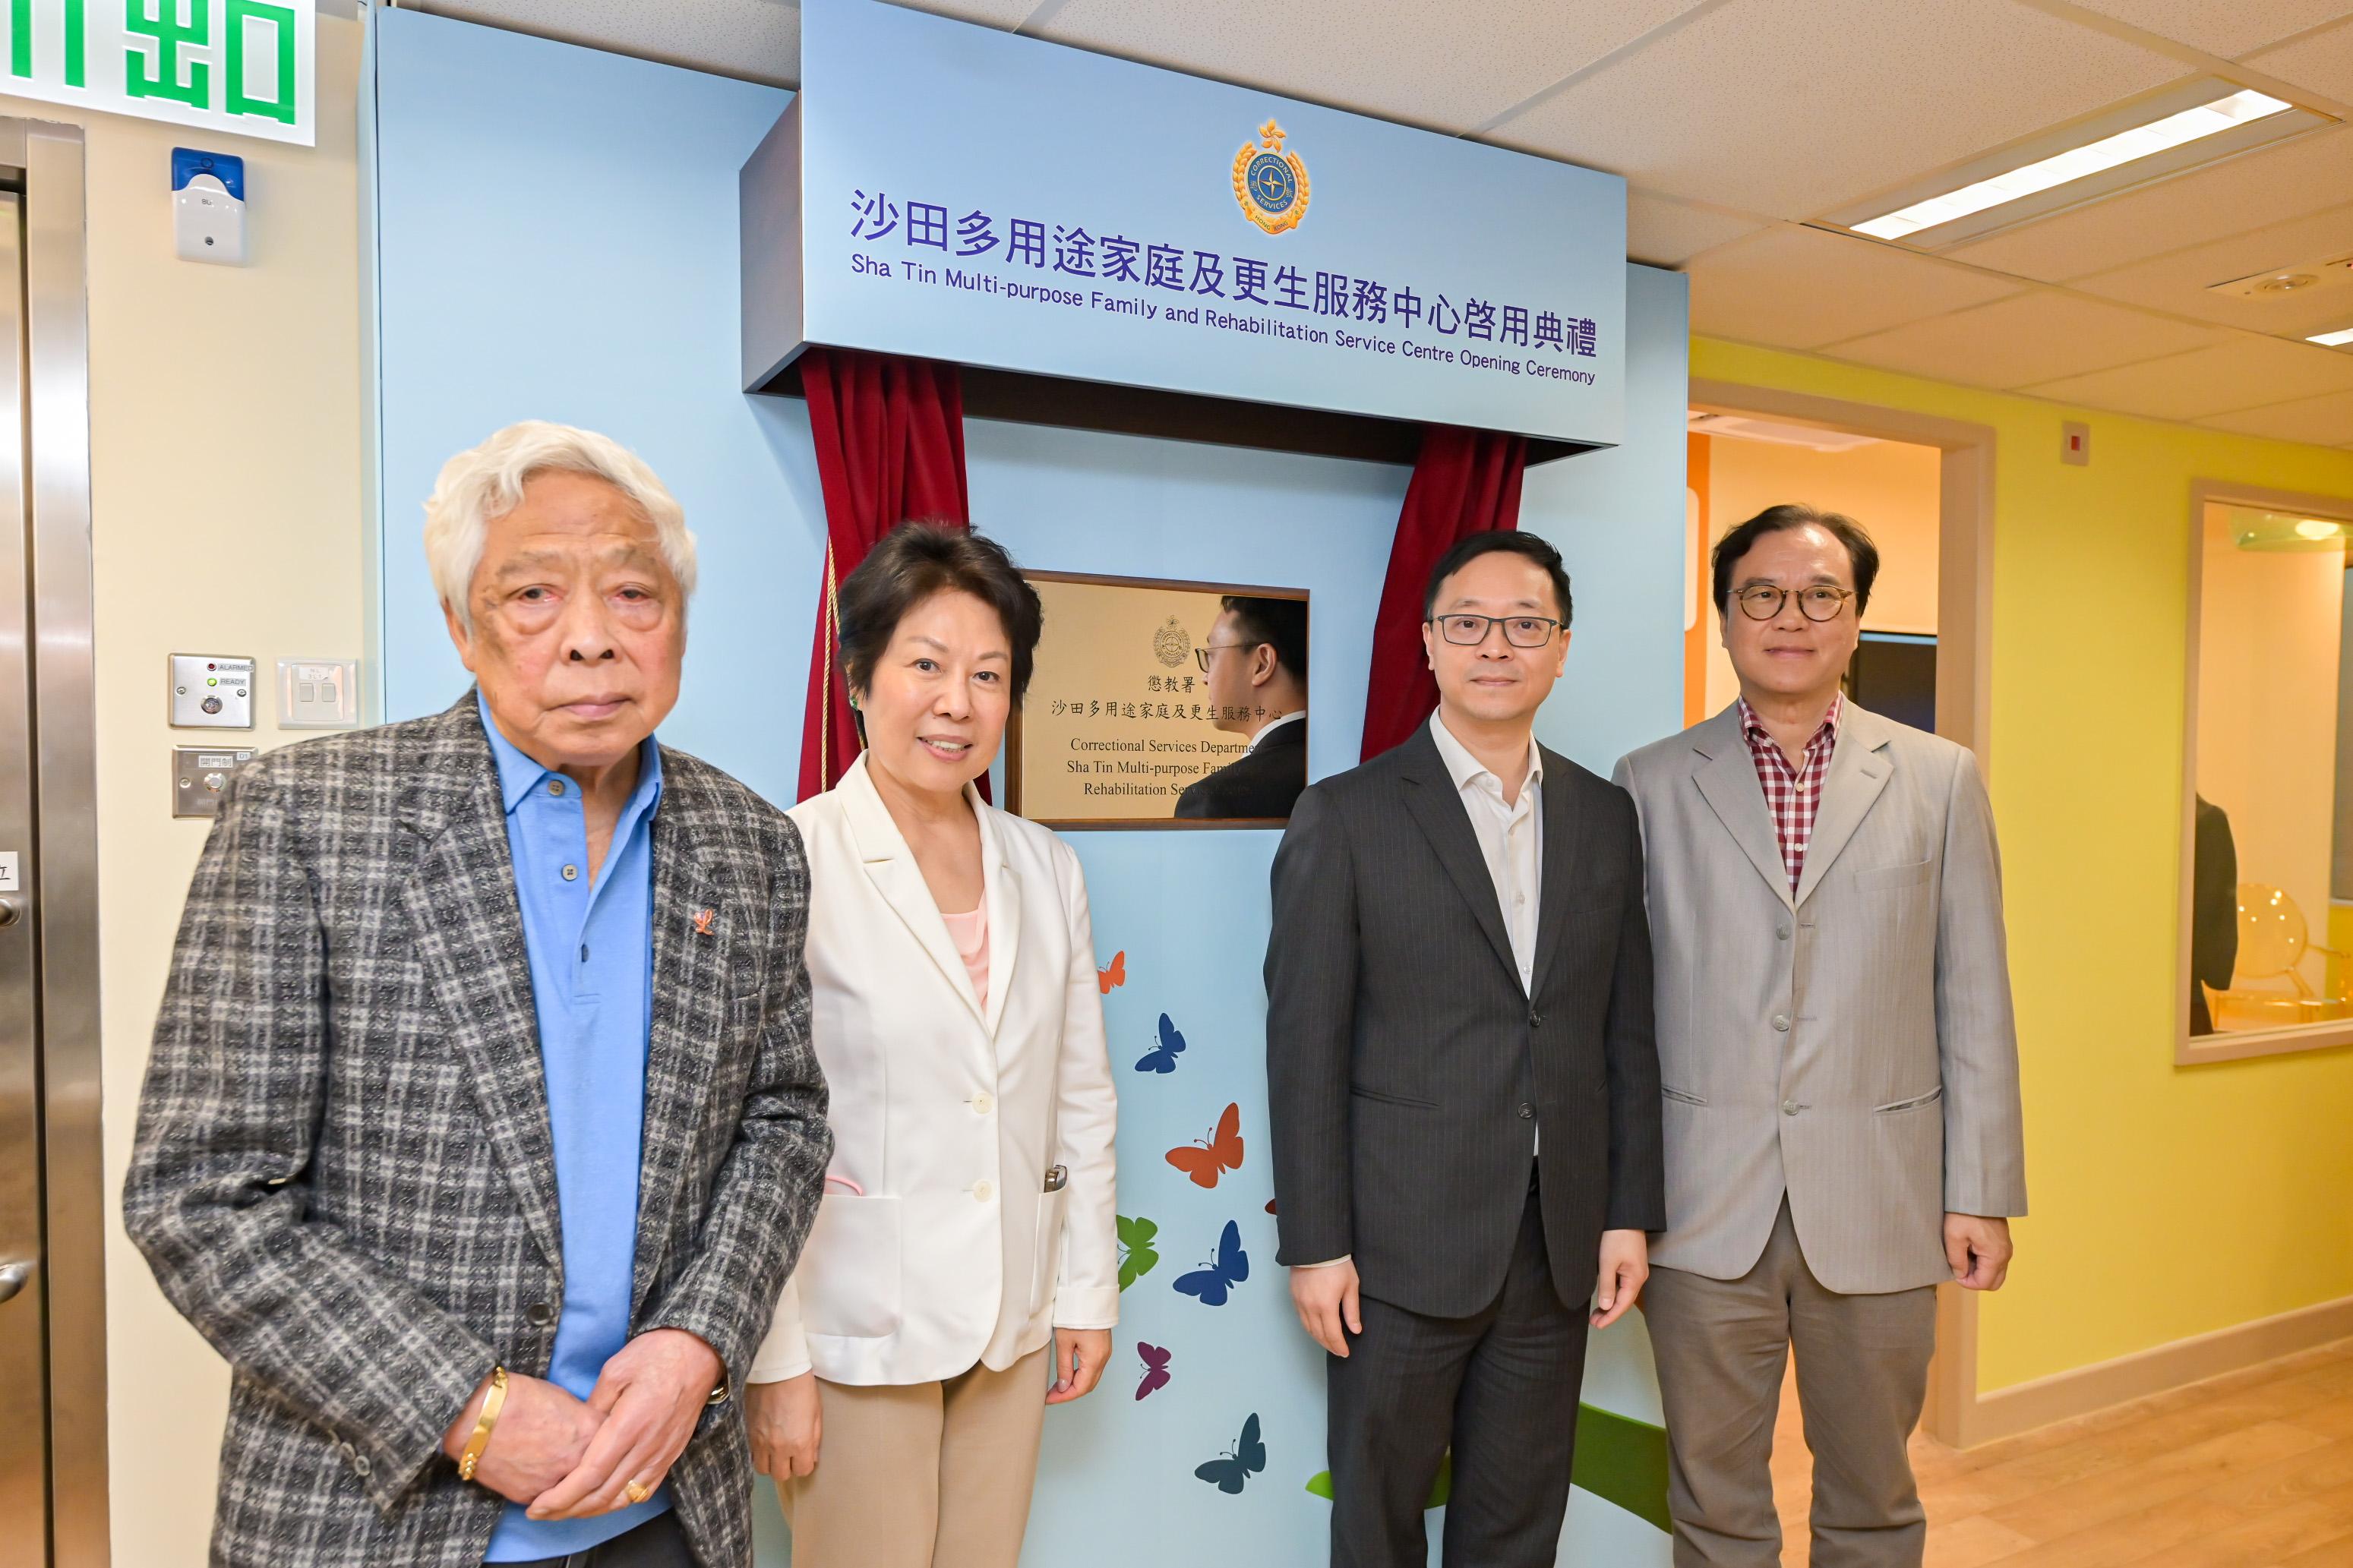 The Correctional Services Department officially launched its multi-purpose family and rehabilitation service centre in Sha Tin today (March 27). Photo shows the Chairman of the Committee on Community Support for Rehabilitated Offenders (CCSRO), Ms Tsui Li (second left); the Honorary Advisors of the CCSRO, Mr Lau Hon-wah (first left) and Mr Siu Chor-kee (first right); and the Commissioner of Correctional Services, Mr Wong Kwok-hing (second right), at the launching ceremony.